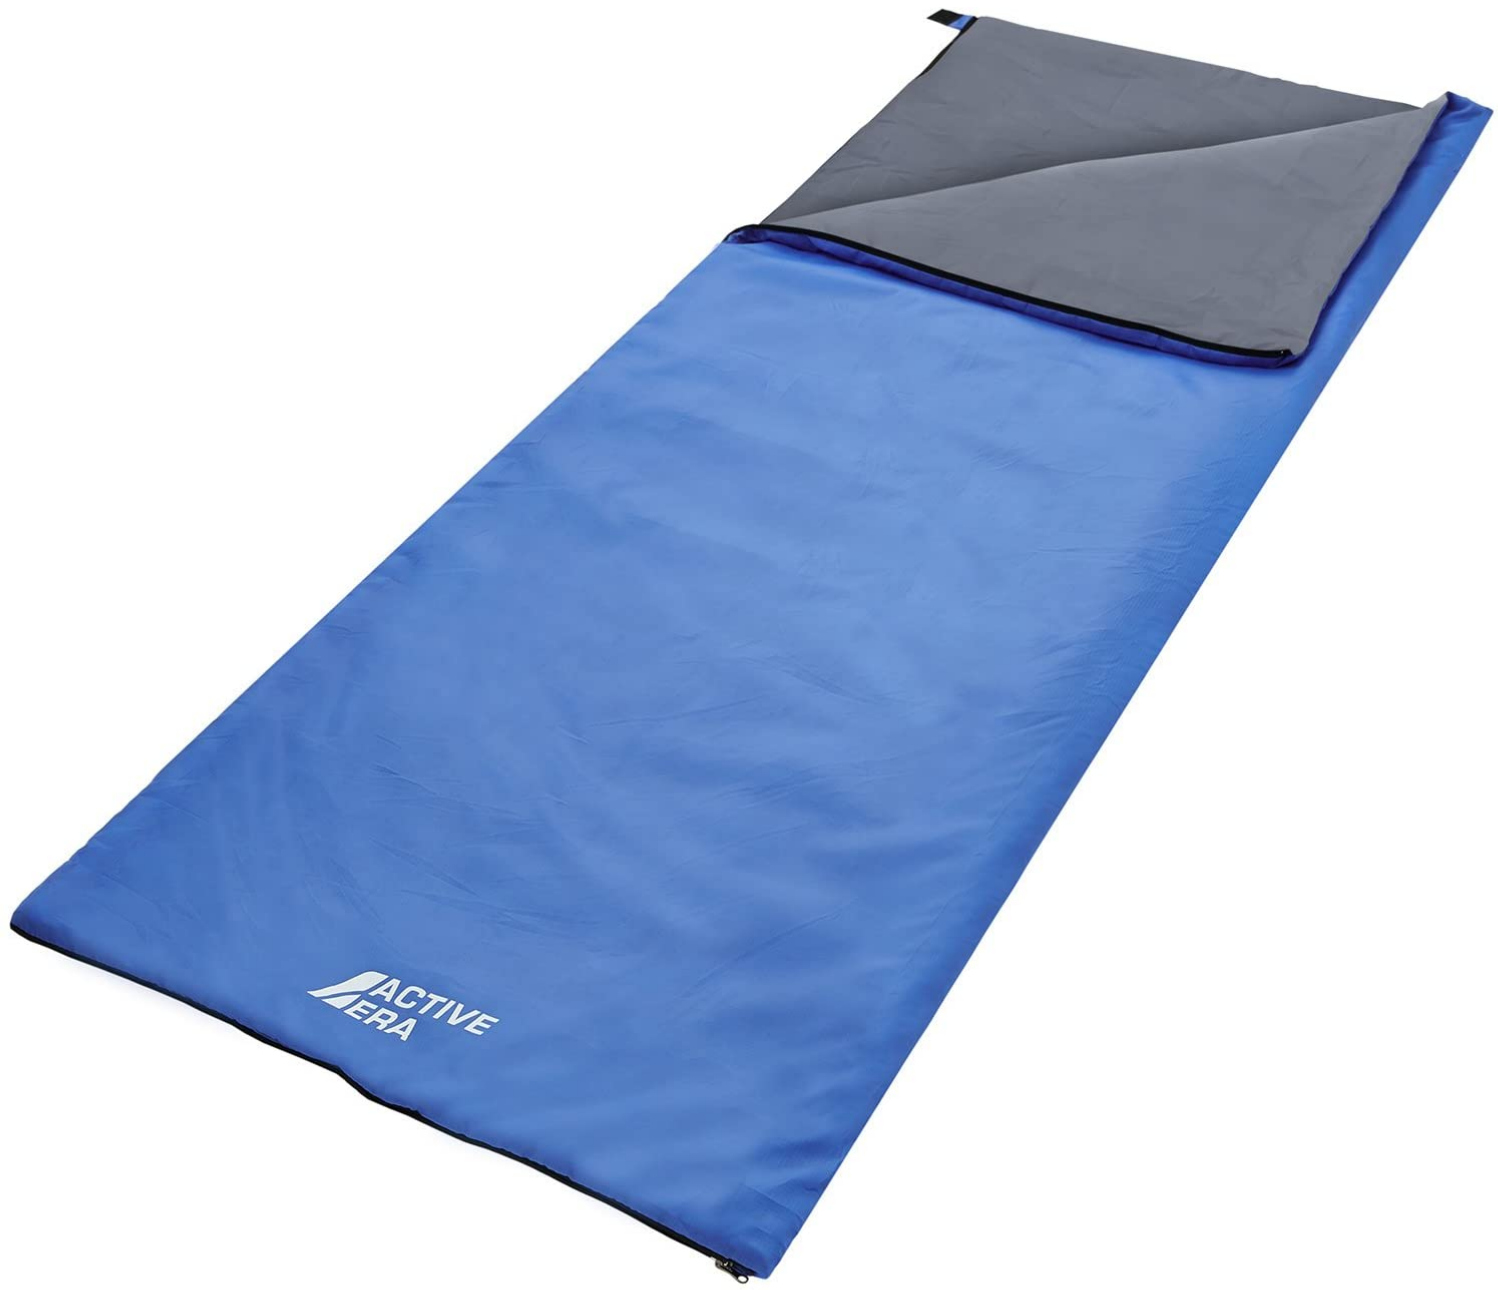 Autumn Winter Season, ACTIVE FOREVER Double Sleeping Bag for Adults & Children 